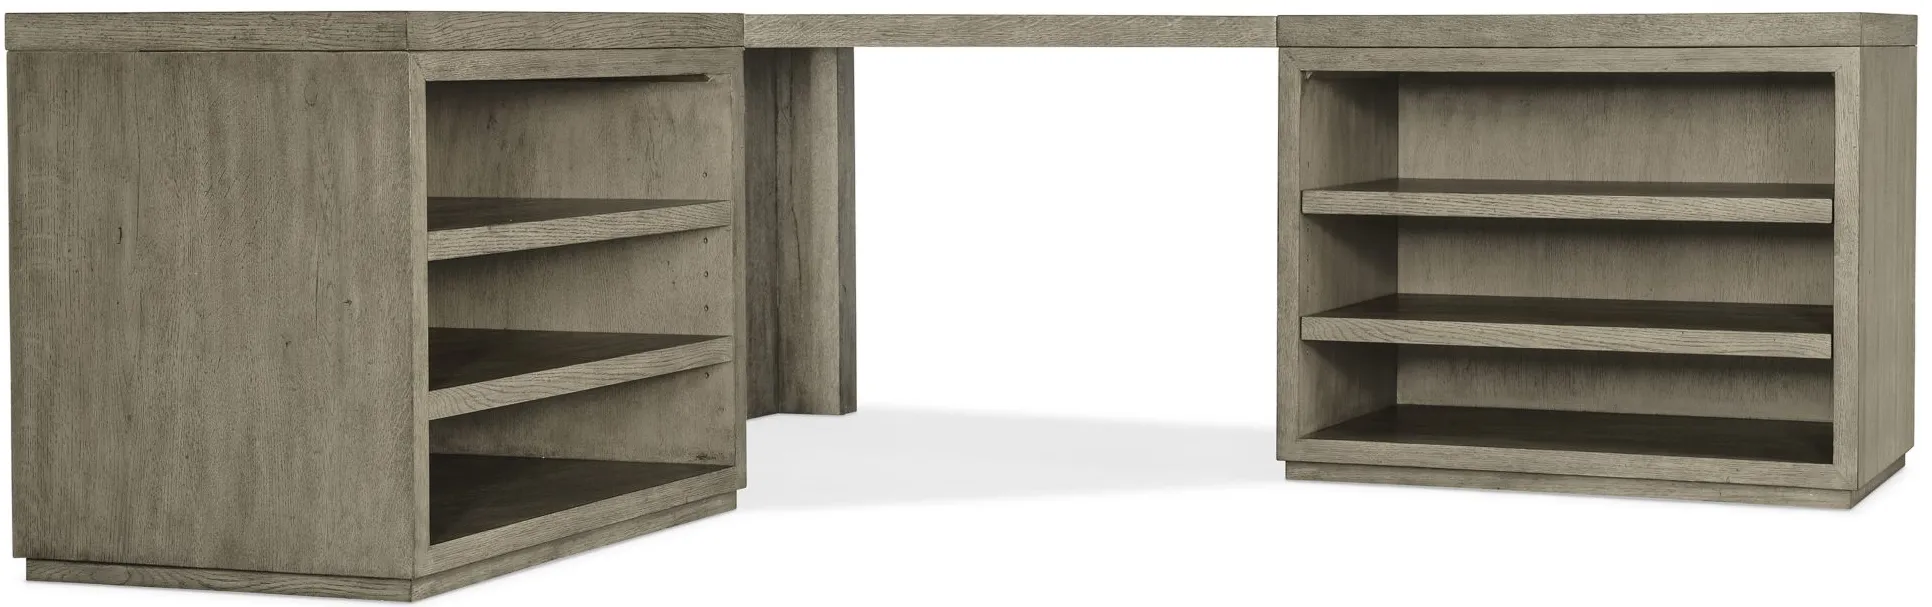 Linville Falls Corner Desk w/ Shelves in Mink: A soft smoked gray finish by Hooker Furniture